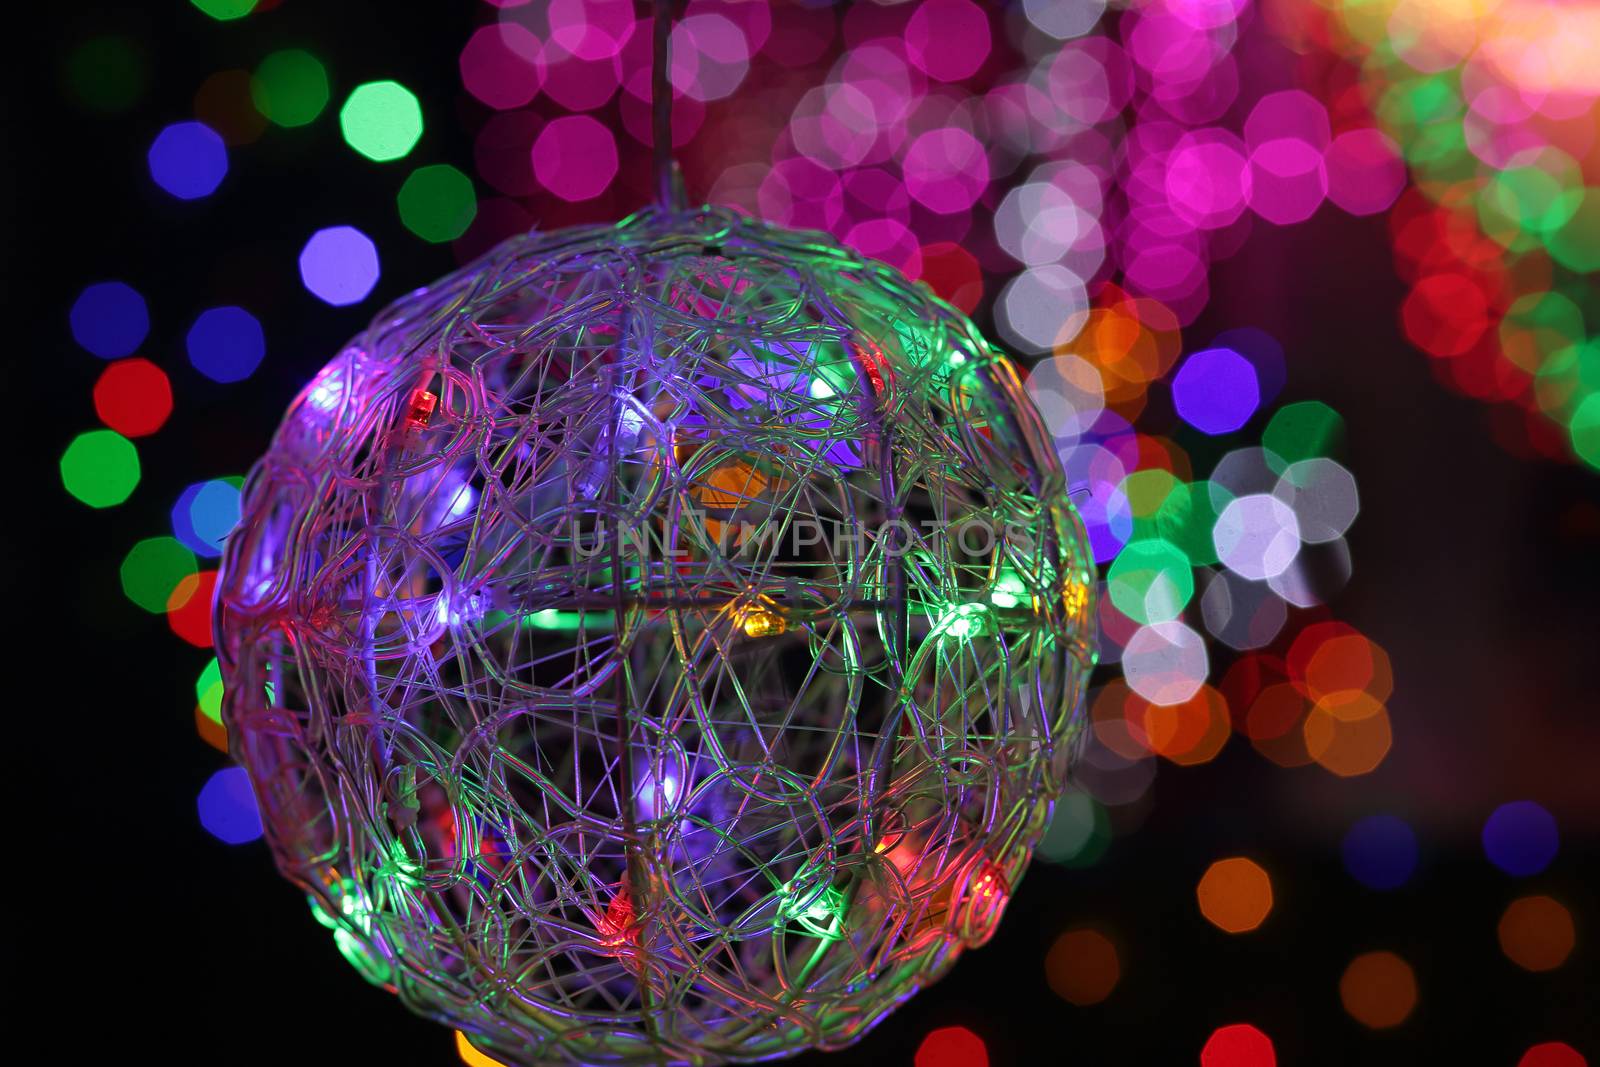 BEAUMONT HILLS, AUSTRALIA - DECEMBER 24, 2015;  Christmas wire mesh bauble ball in foreground with defocused colorued led lights in background - bokeh